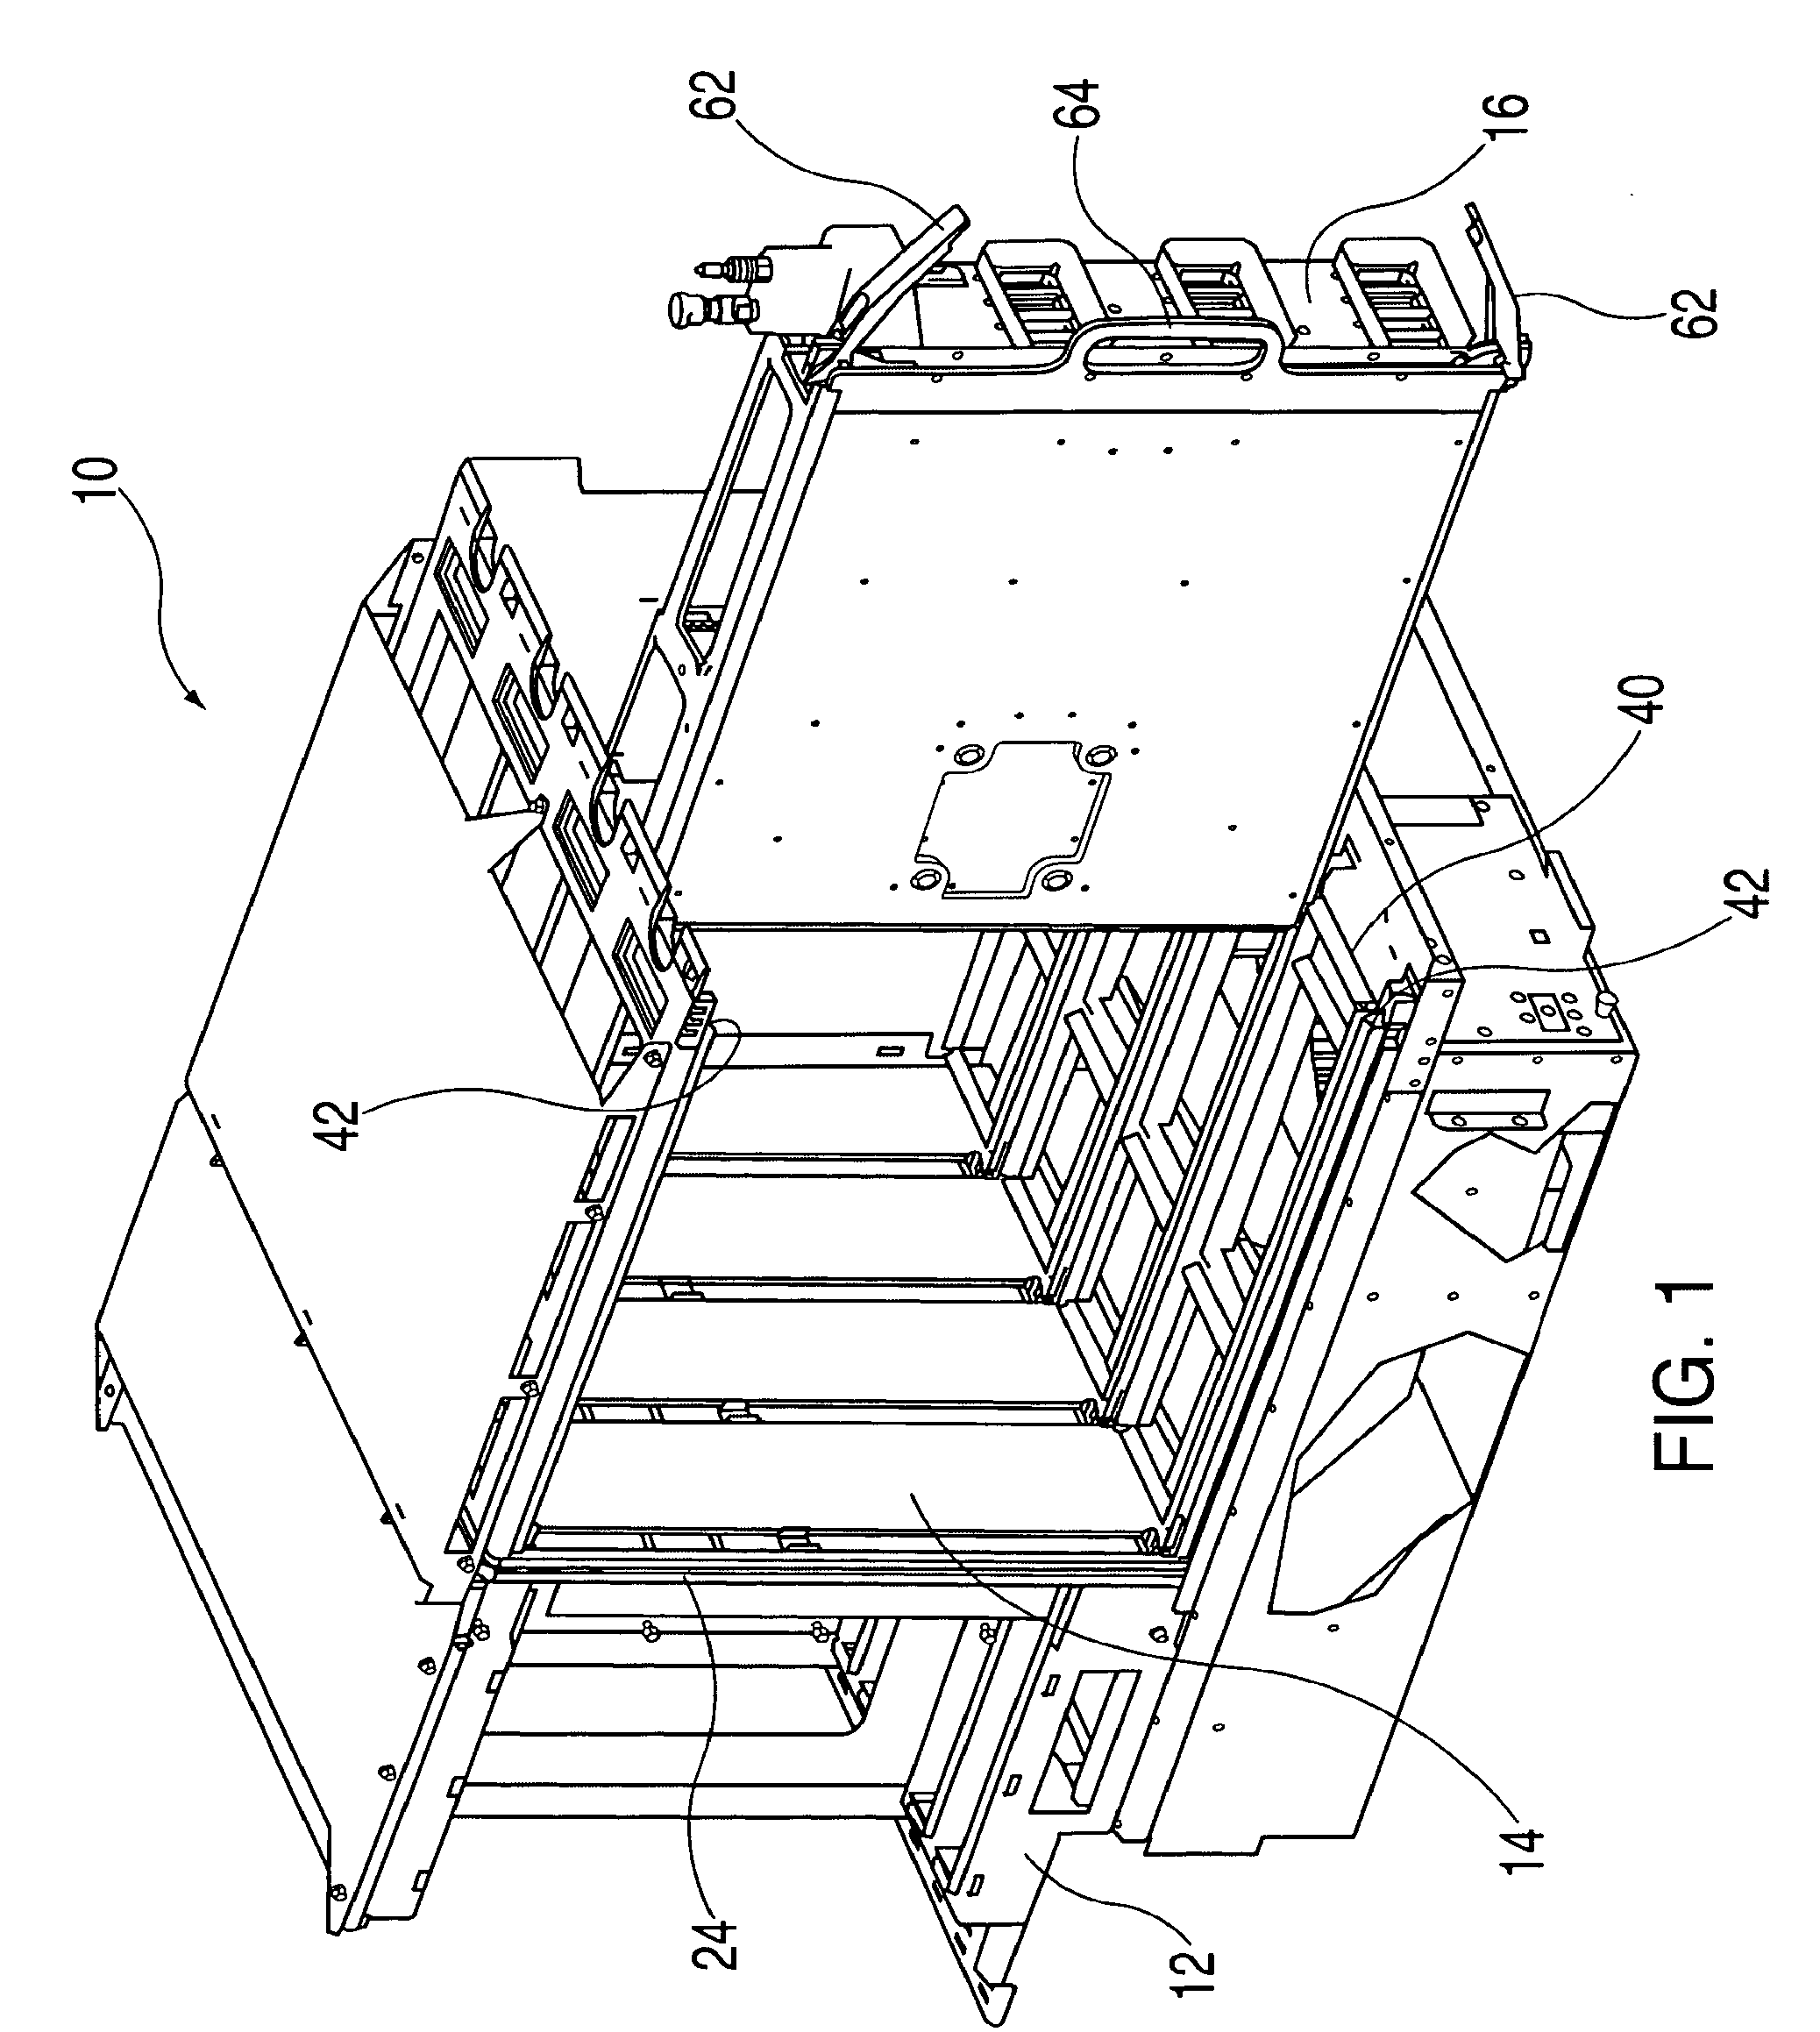 System and method for aligning and supporting interconnect systems